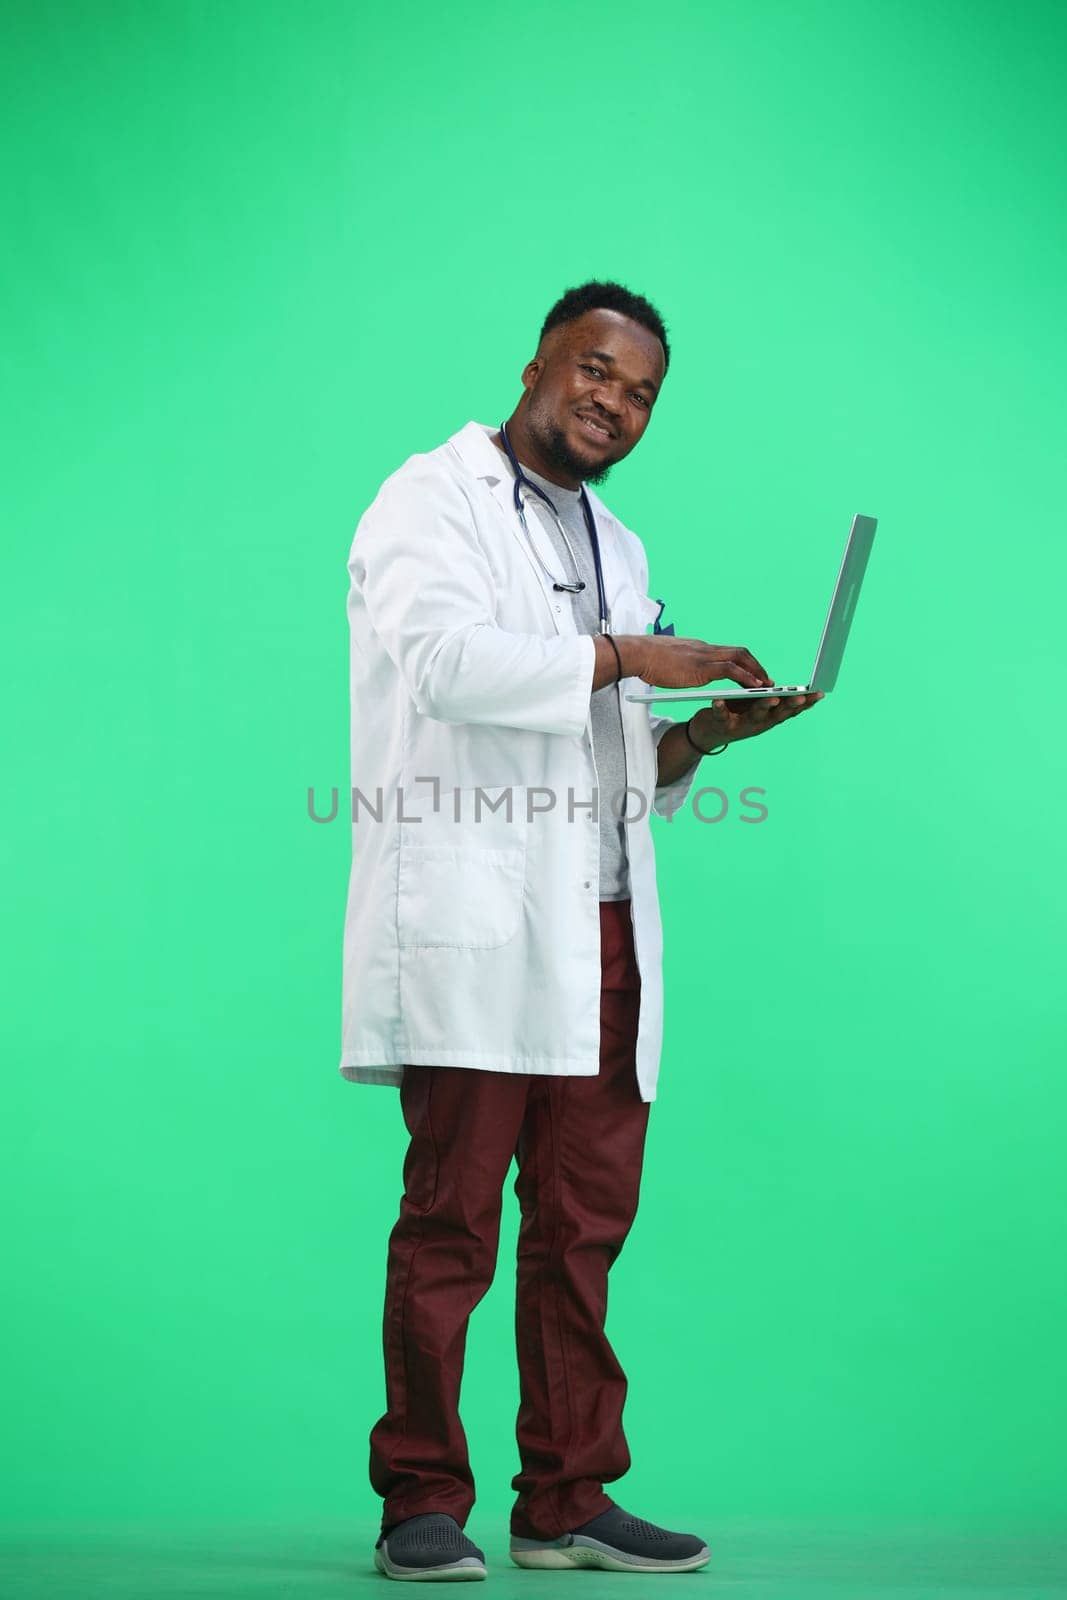 The doctor, in full height, on a green background, uses a laptop.